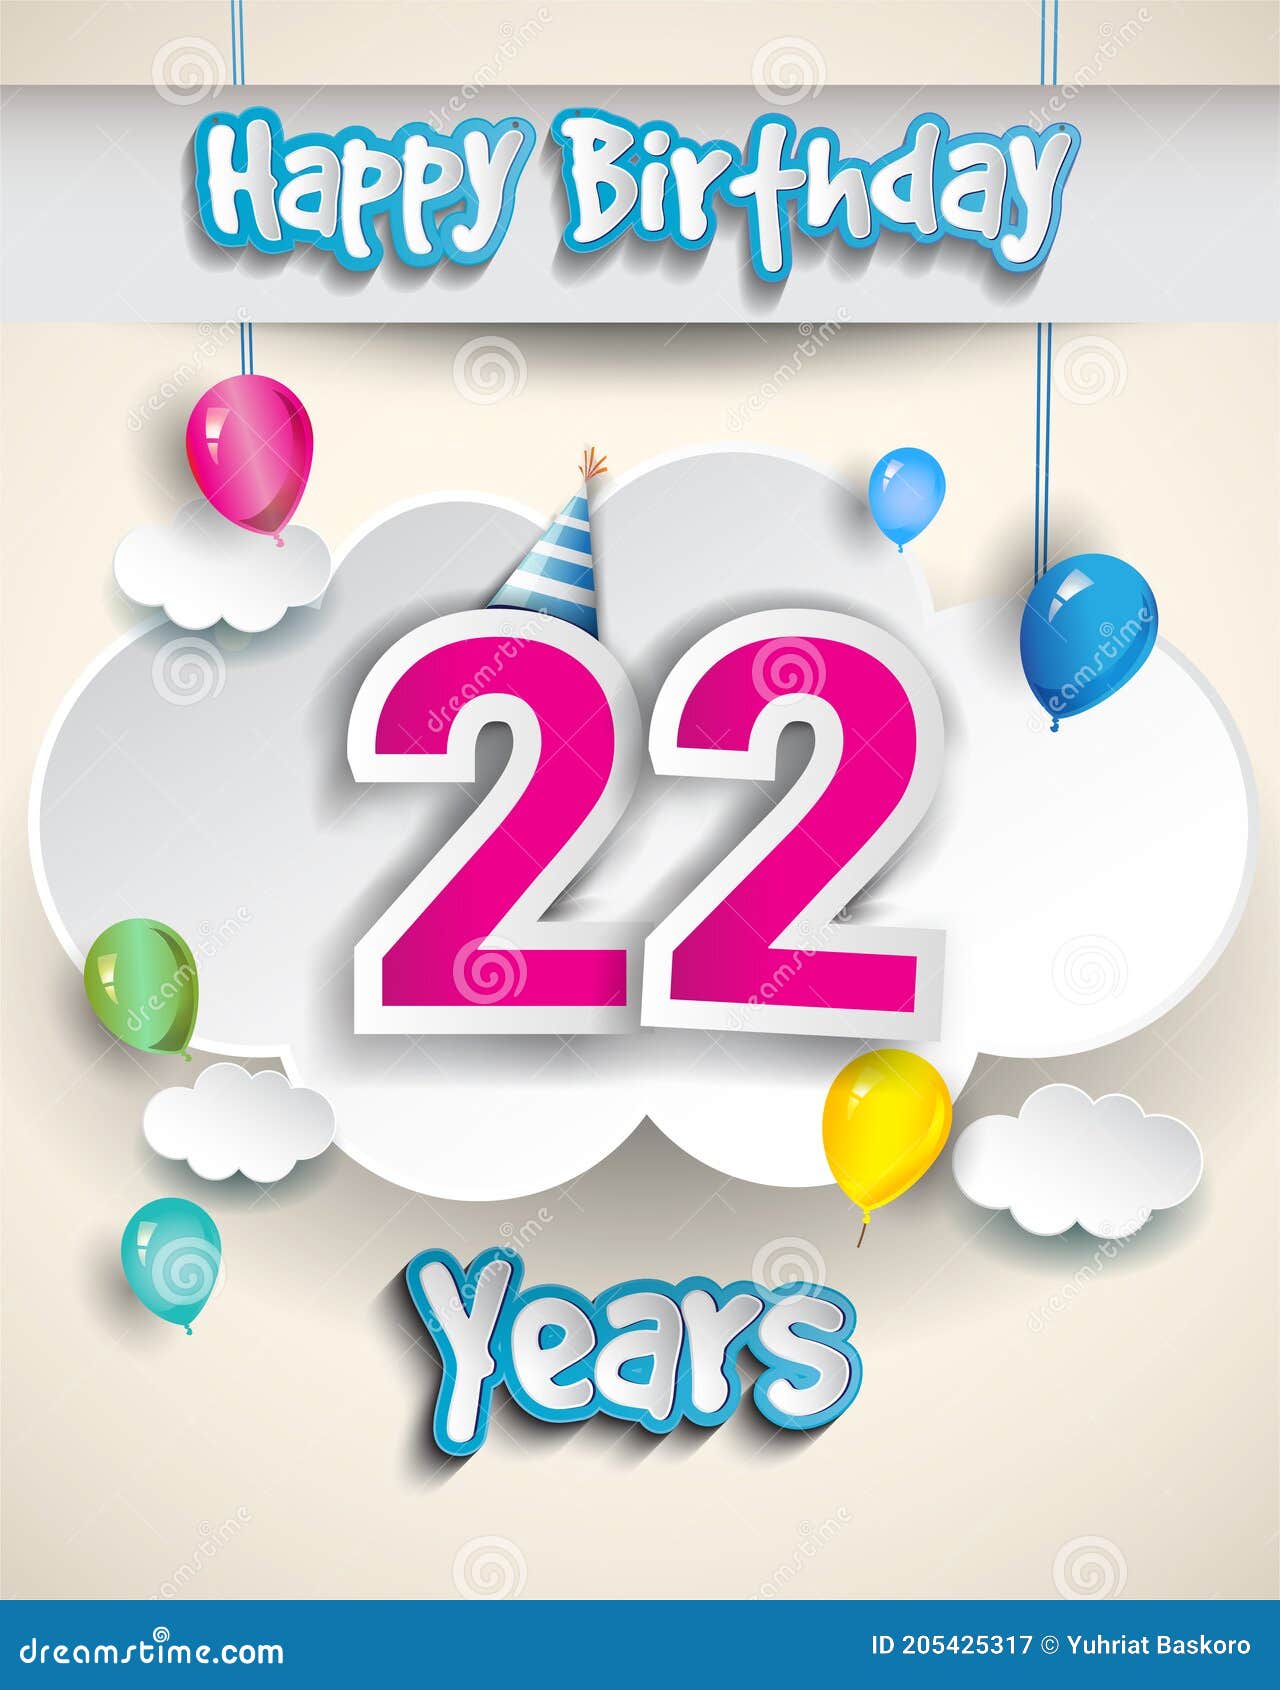 nd anniversary celebration design clouds balloons confetti vector template elements birthday party 205425317